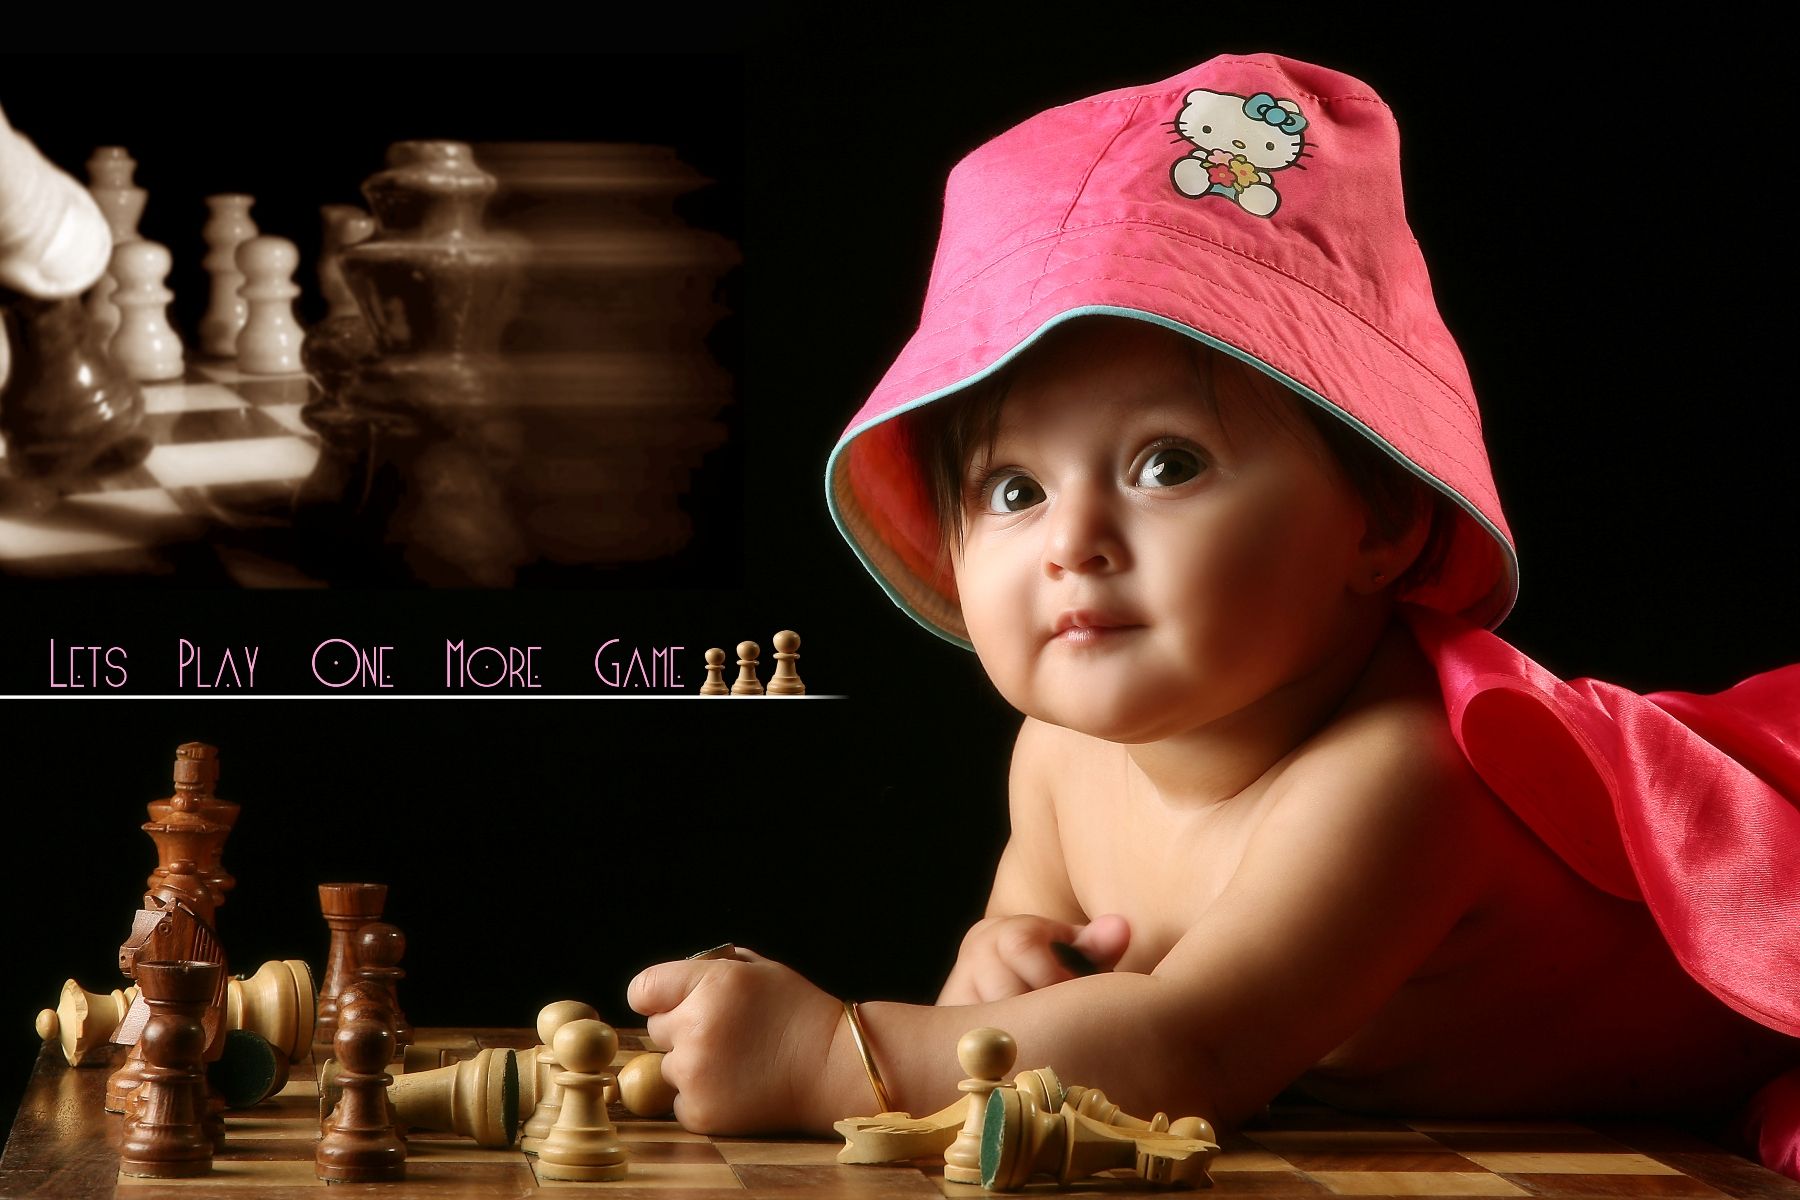 baby wallpaper free download,games,chess,chessboard,child,play